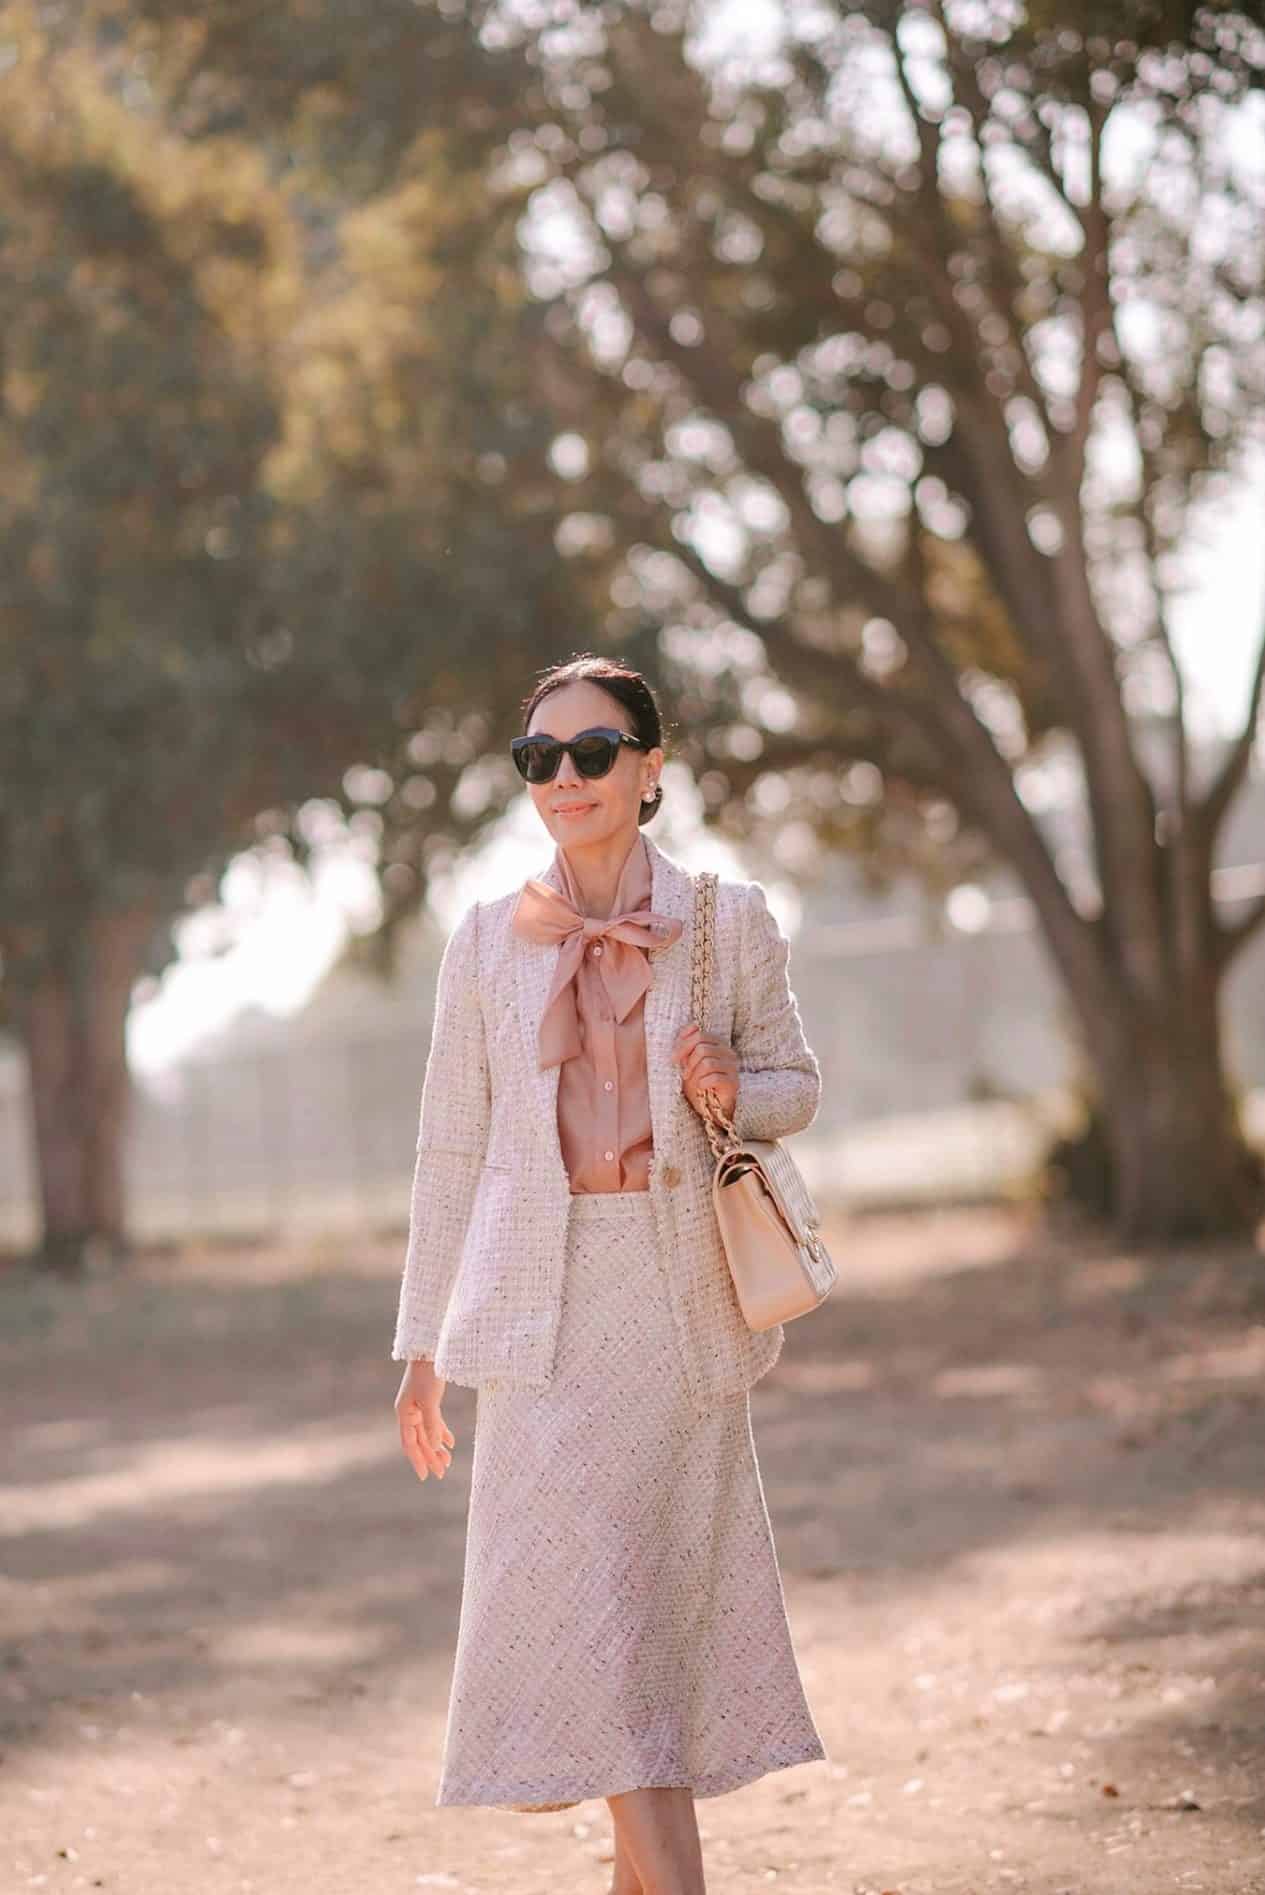 image of a woman in a pink tweed skirt suit walking down a road with trees in the background